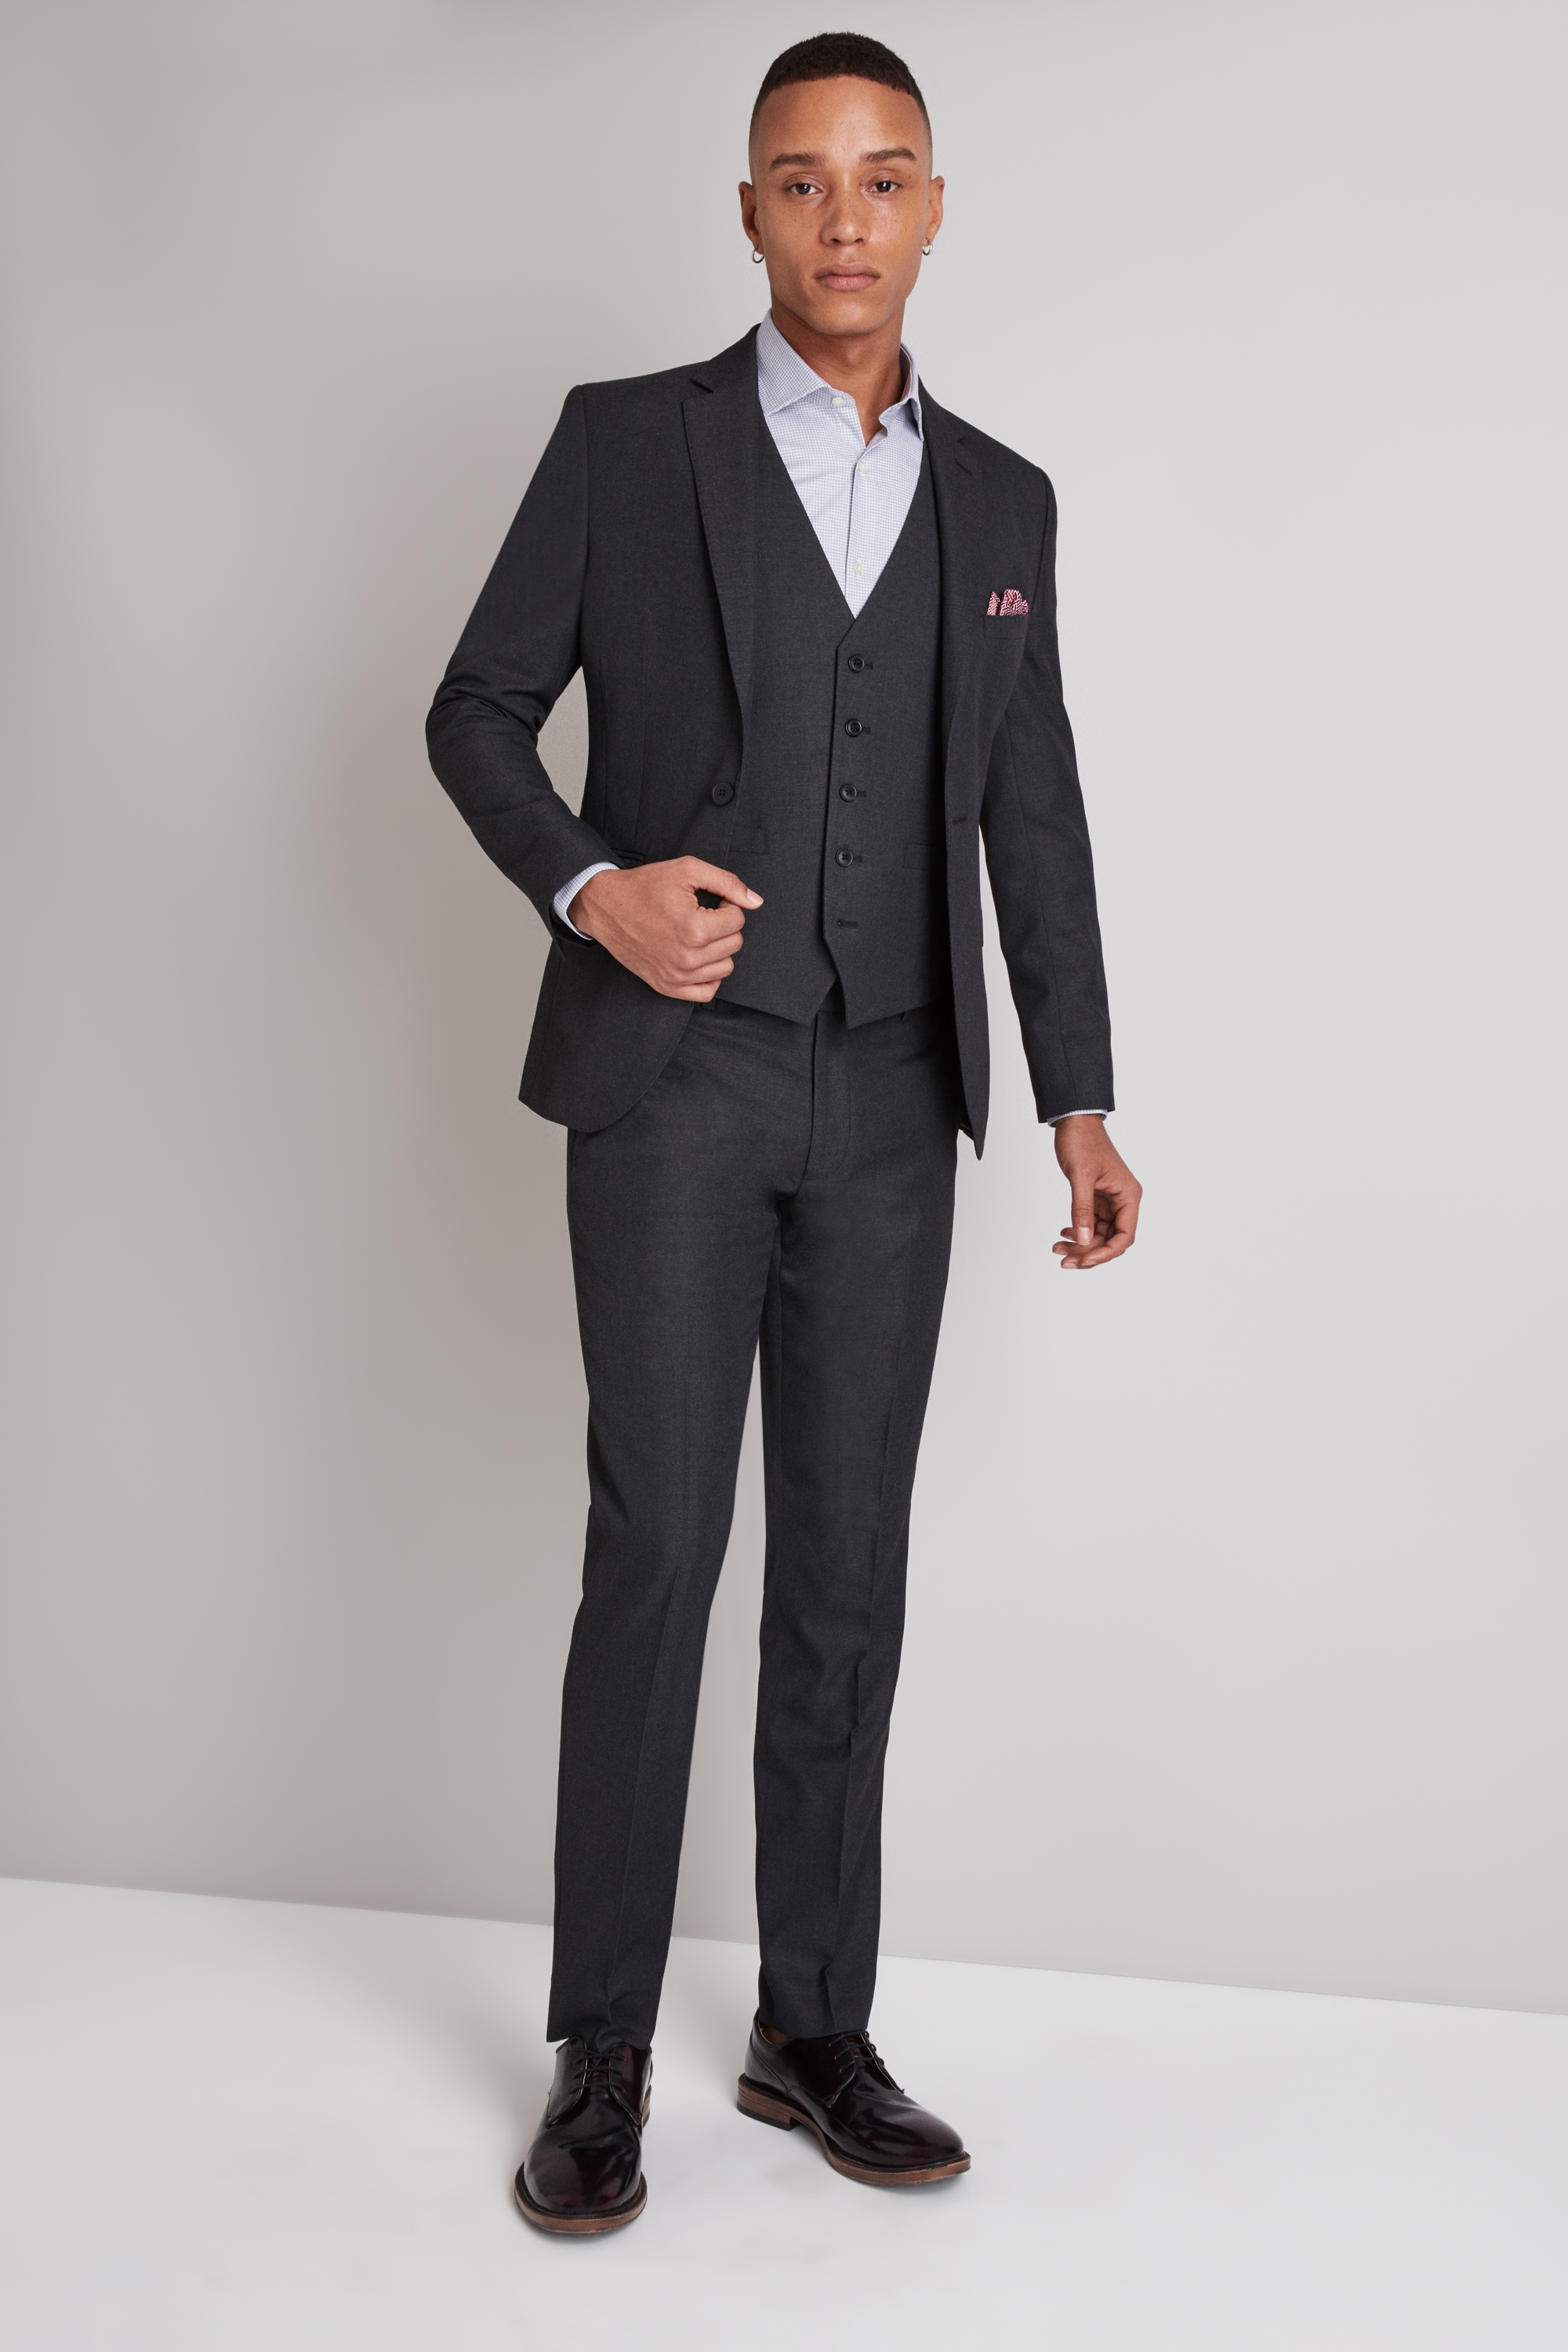 Interview Suits & Smart Business Suits | Moss Bros.